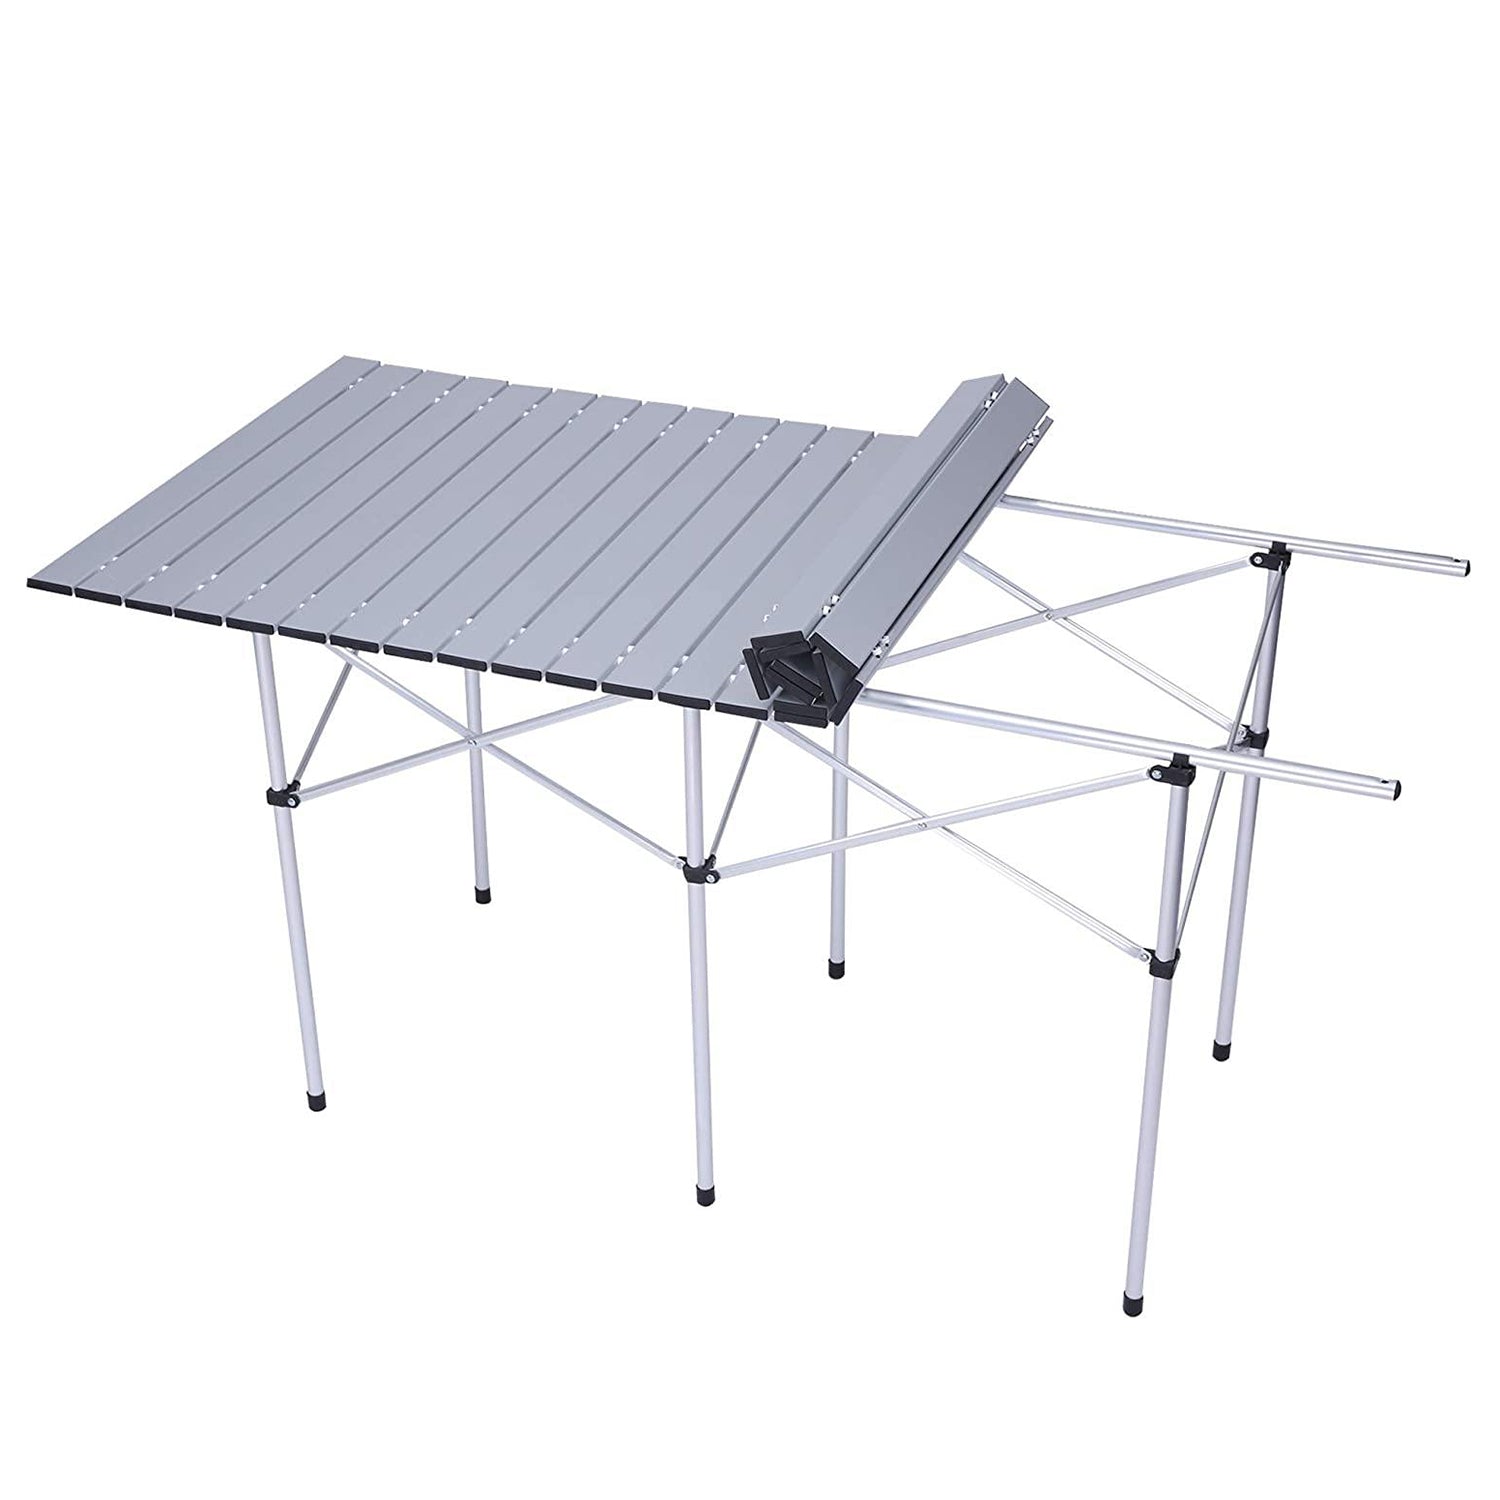 Portable Folding Lightweight Aluminum Camping Picnic Table, Compact Roll Top Table with Carry Bag